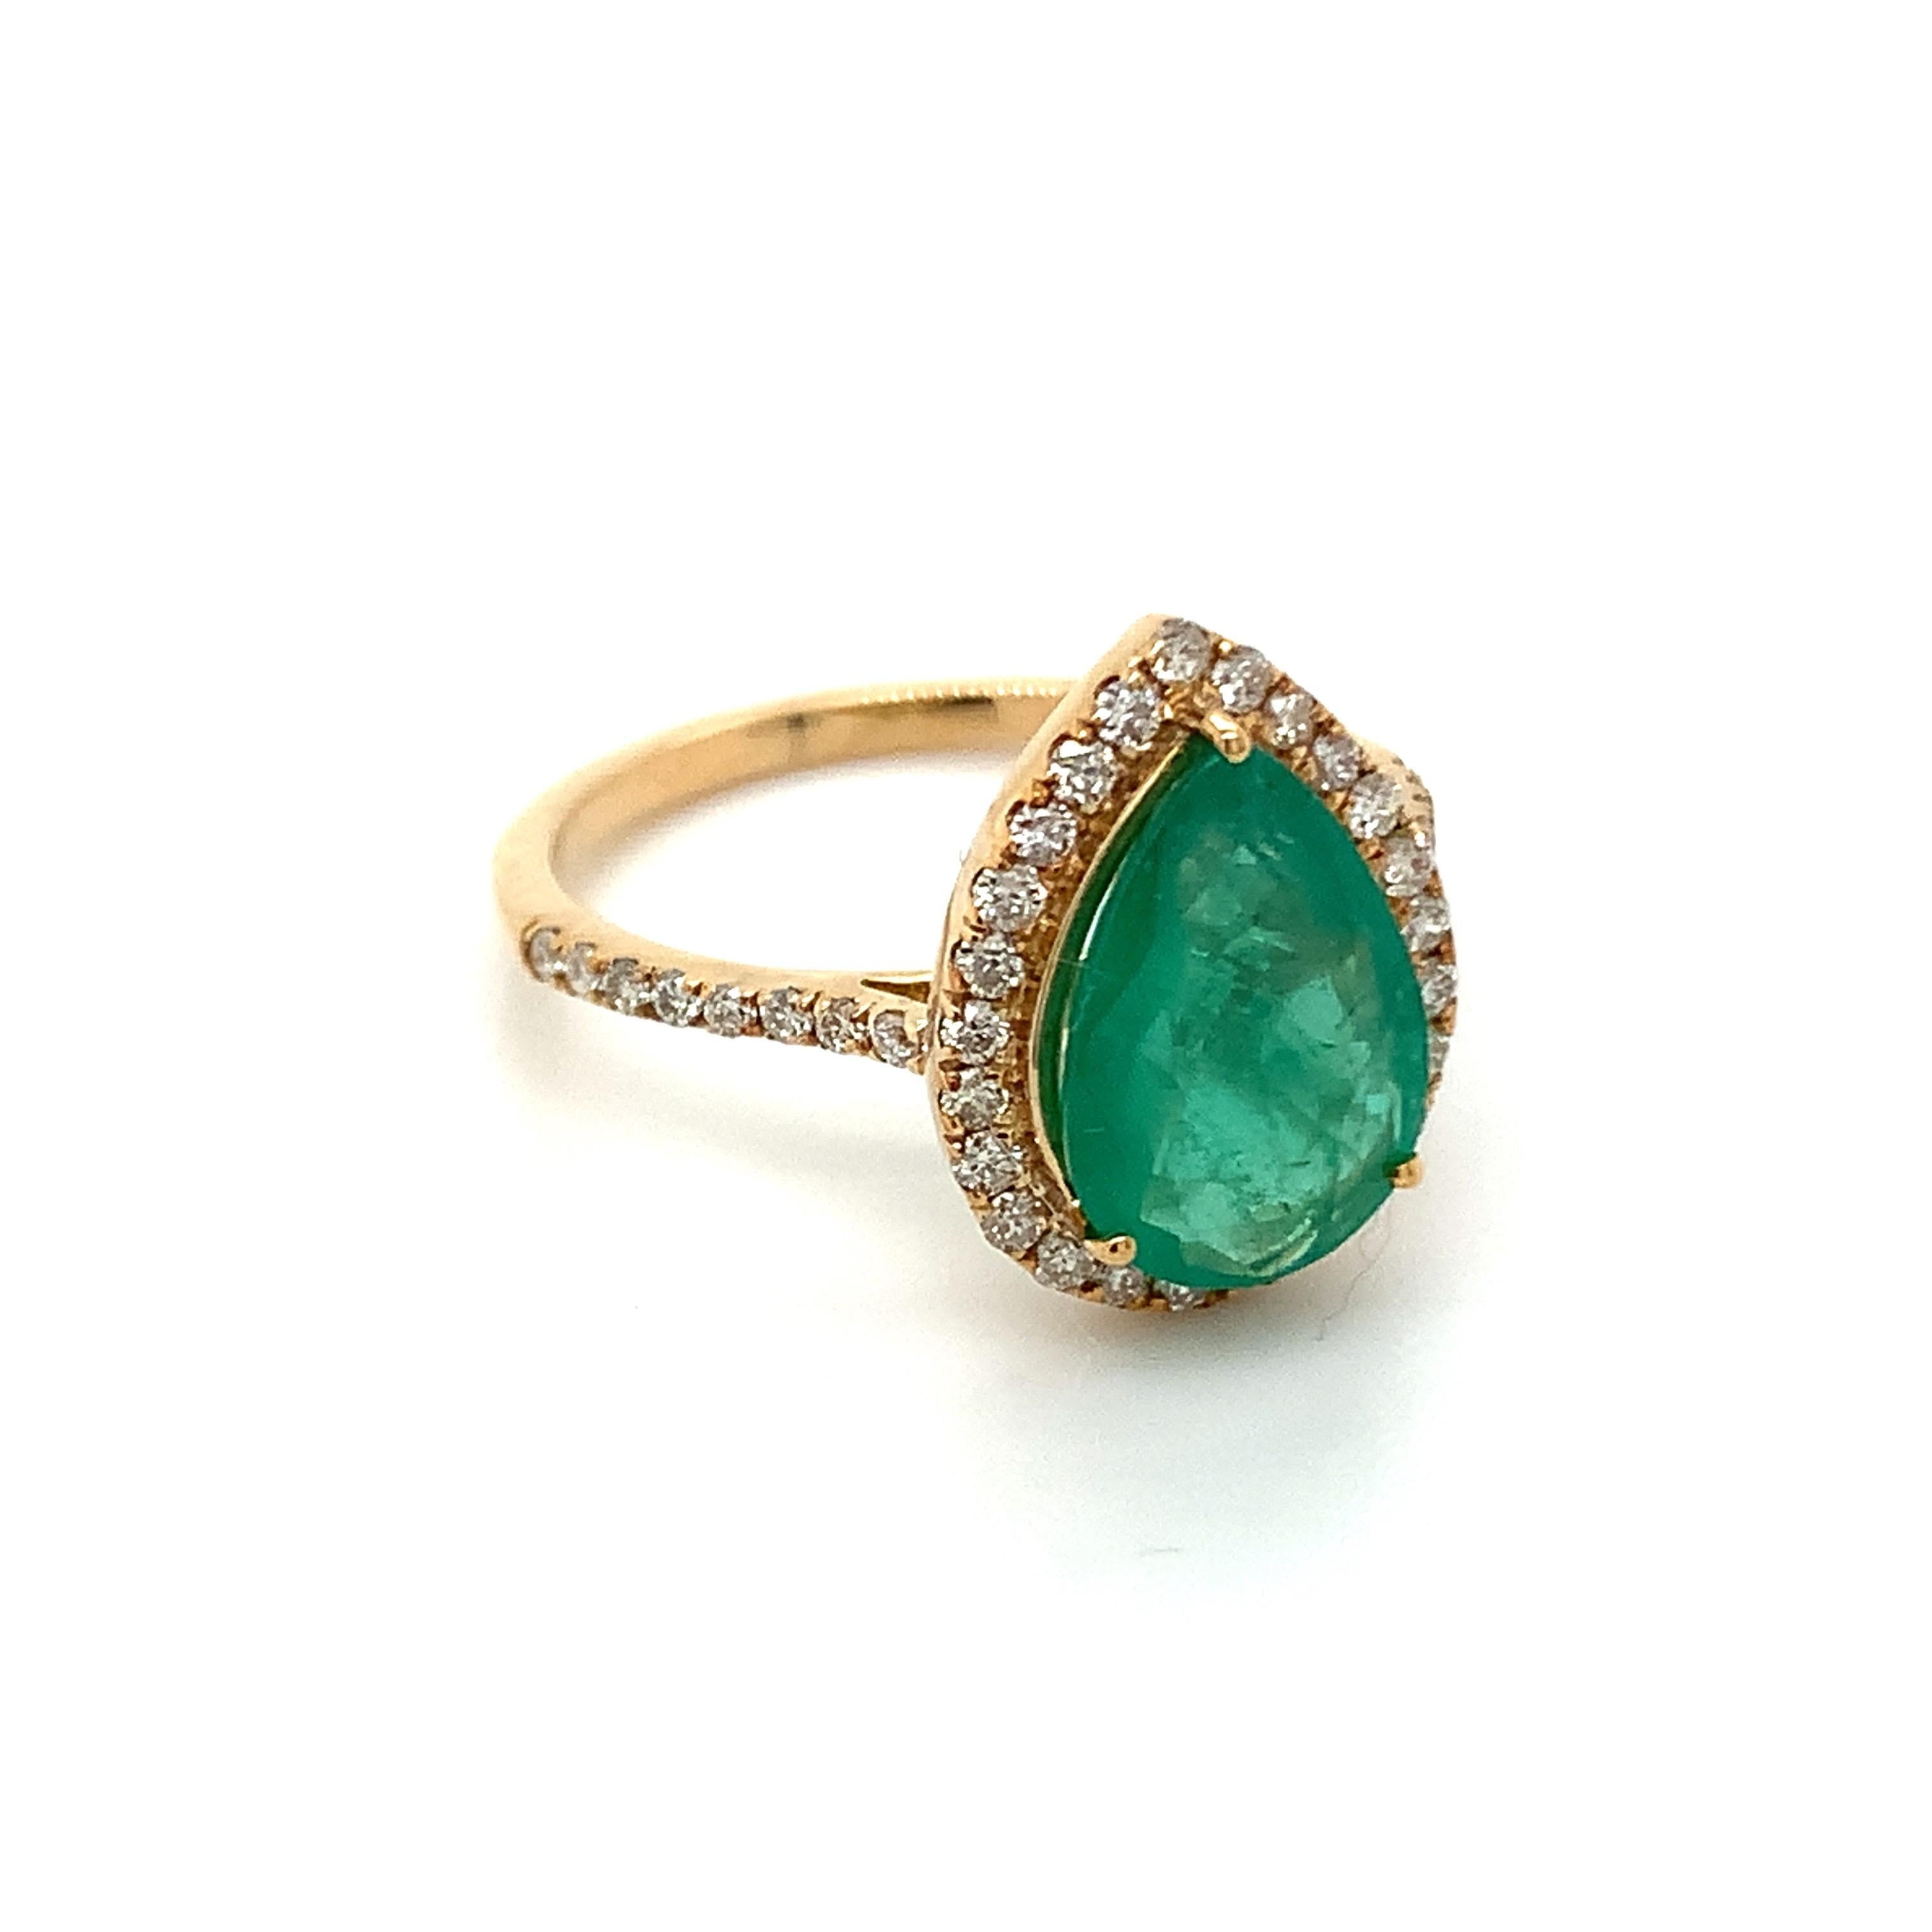 Pear shape emerald gemstone beautifully crafted in a 10K yellow gold ring with natural diamonds.

With a vibrant green color hue. The birthstone for May is a symbol of renewed spring growth. Explore a vast range of precious stone Jewelry in our